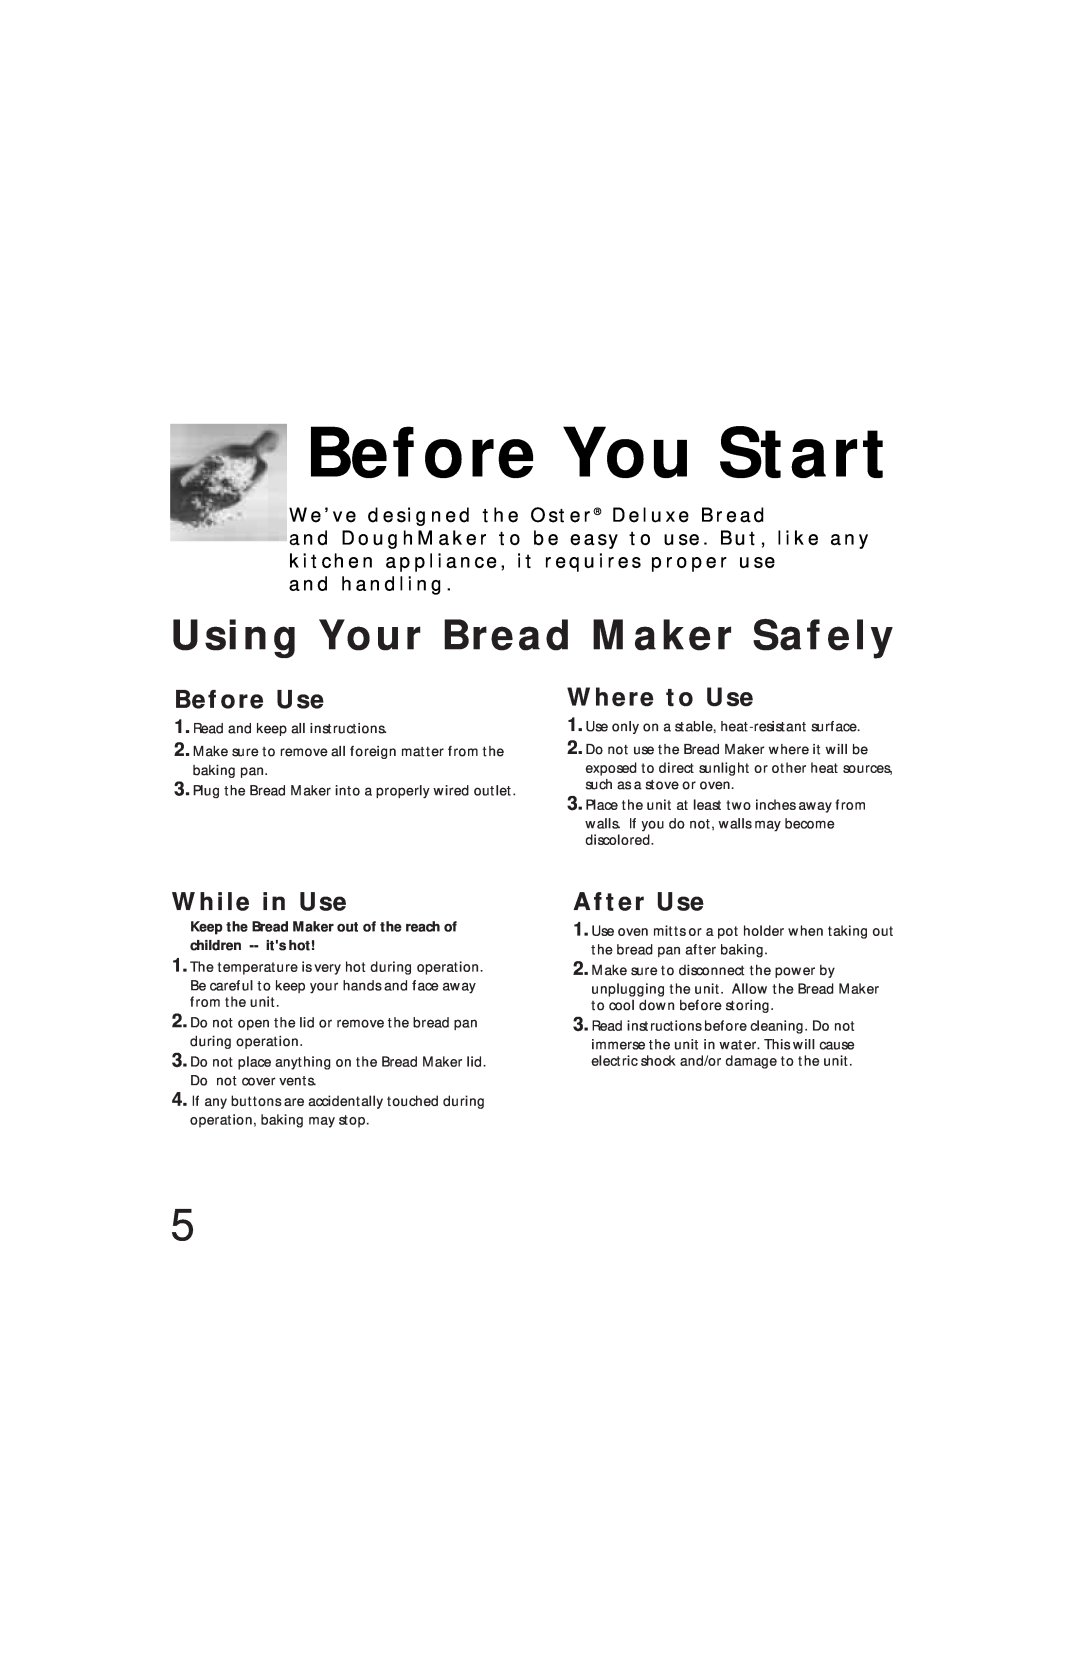 Oster Bread & Dough Maker manual Before You Start, Using Your Bread Maker Safely 